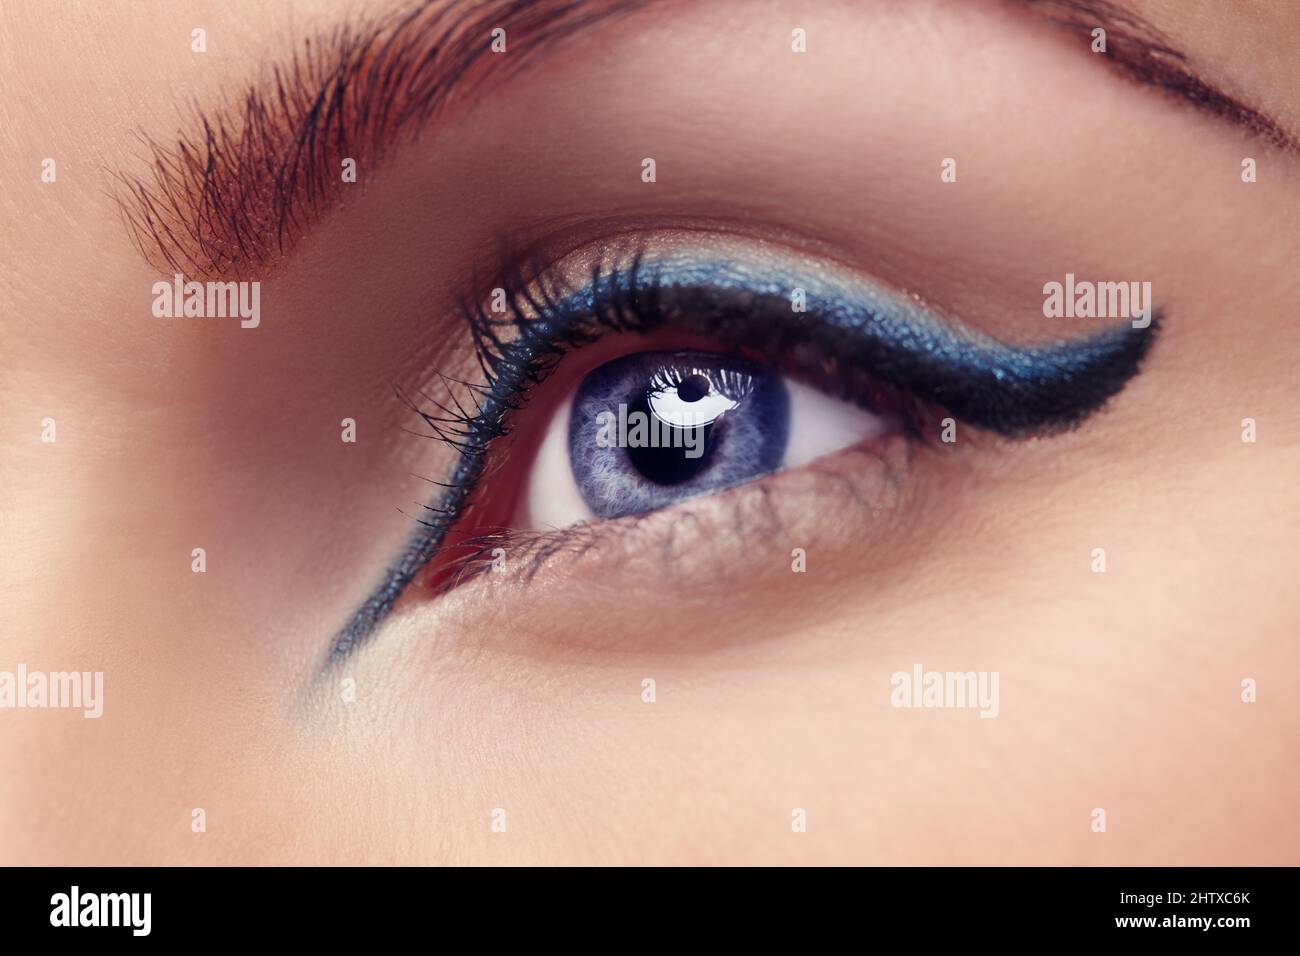 The eyes are the window to the soul. Close up of a blue eye with blue eyeliner. Stock Photo